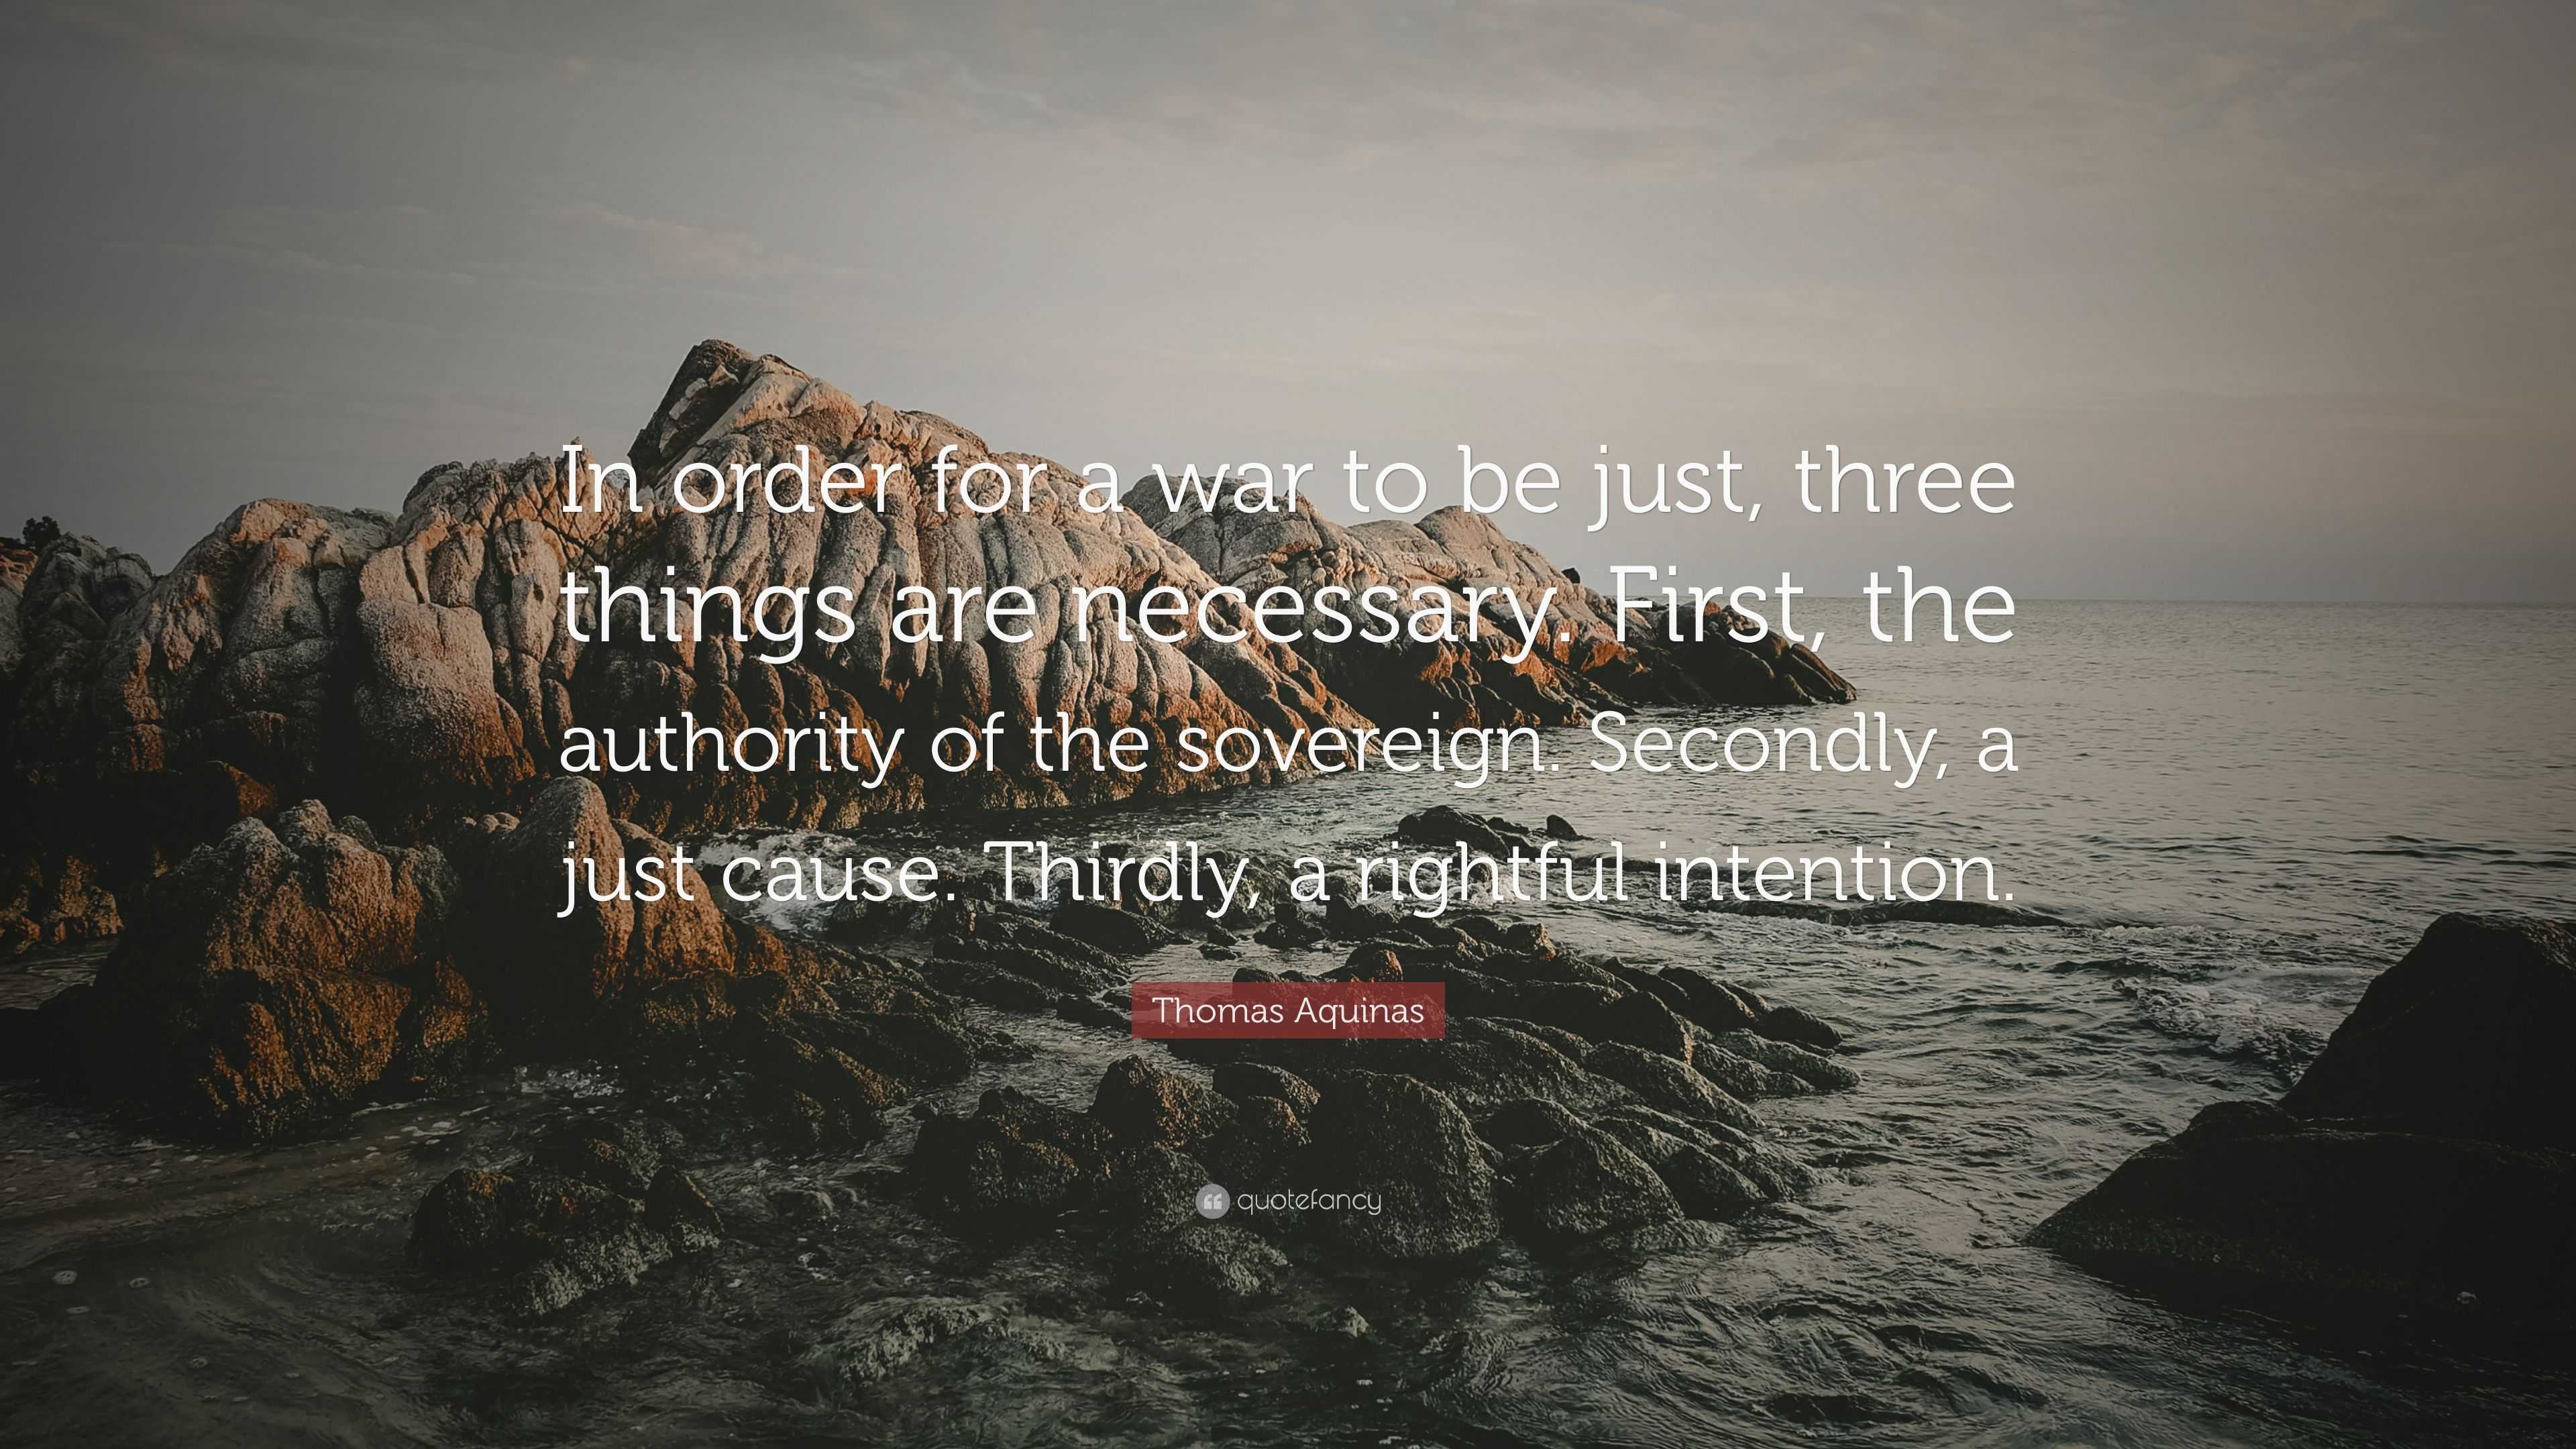 Thomas Aquinas Quote: “In order for a war to be just, three things are ...